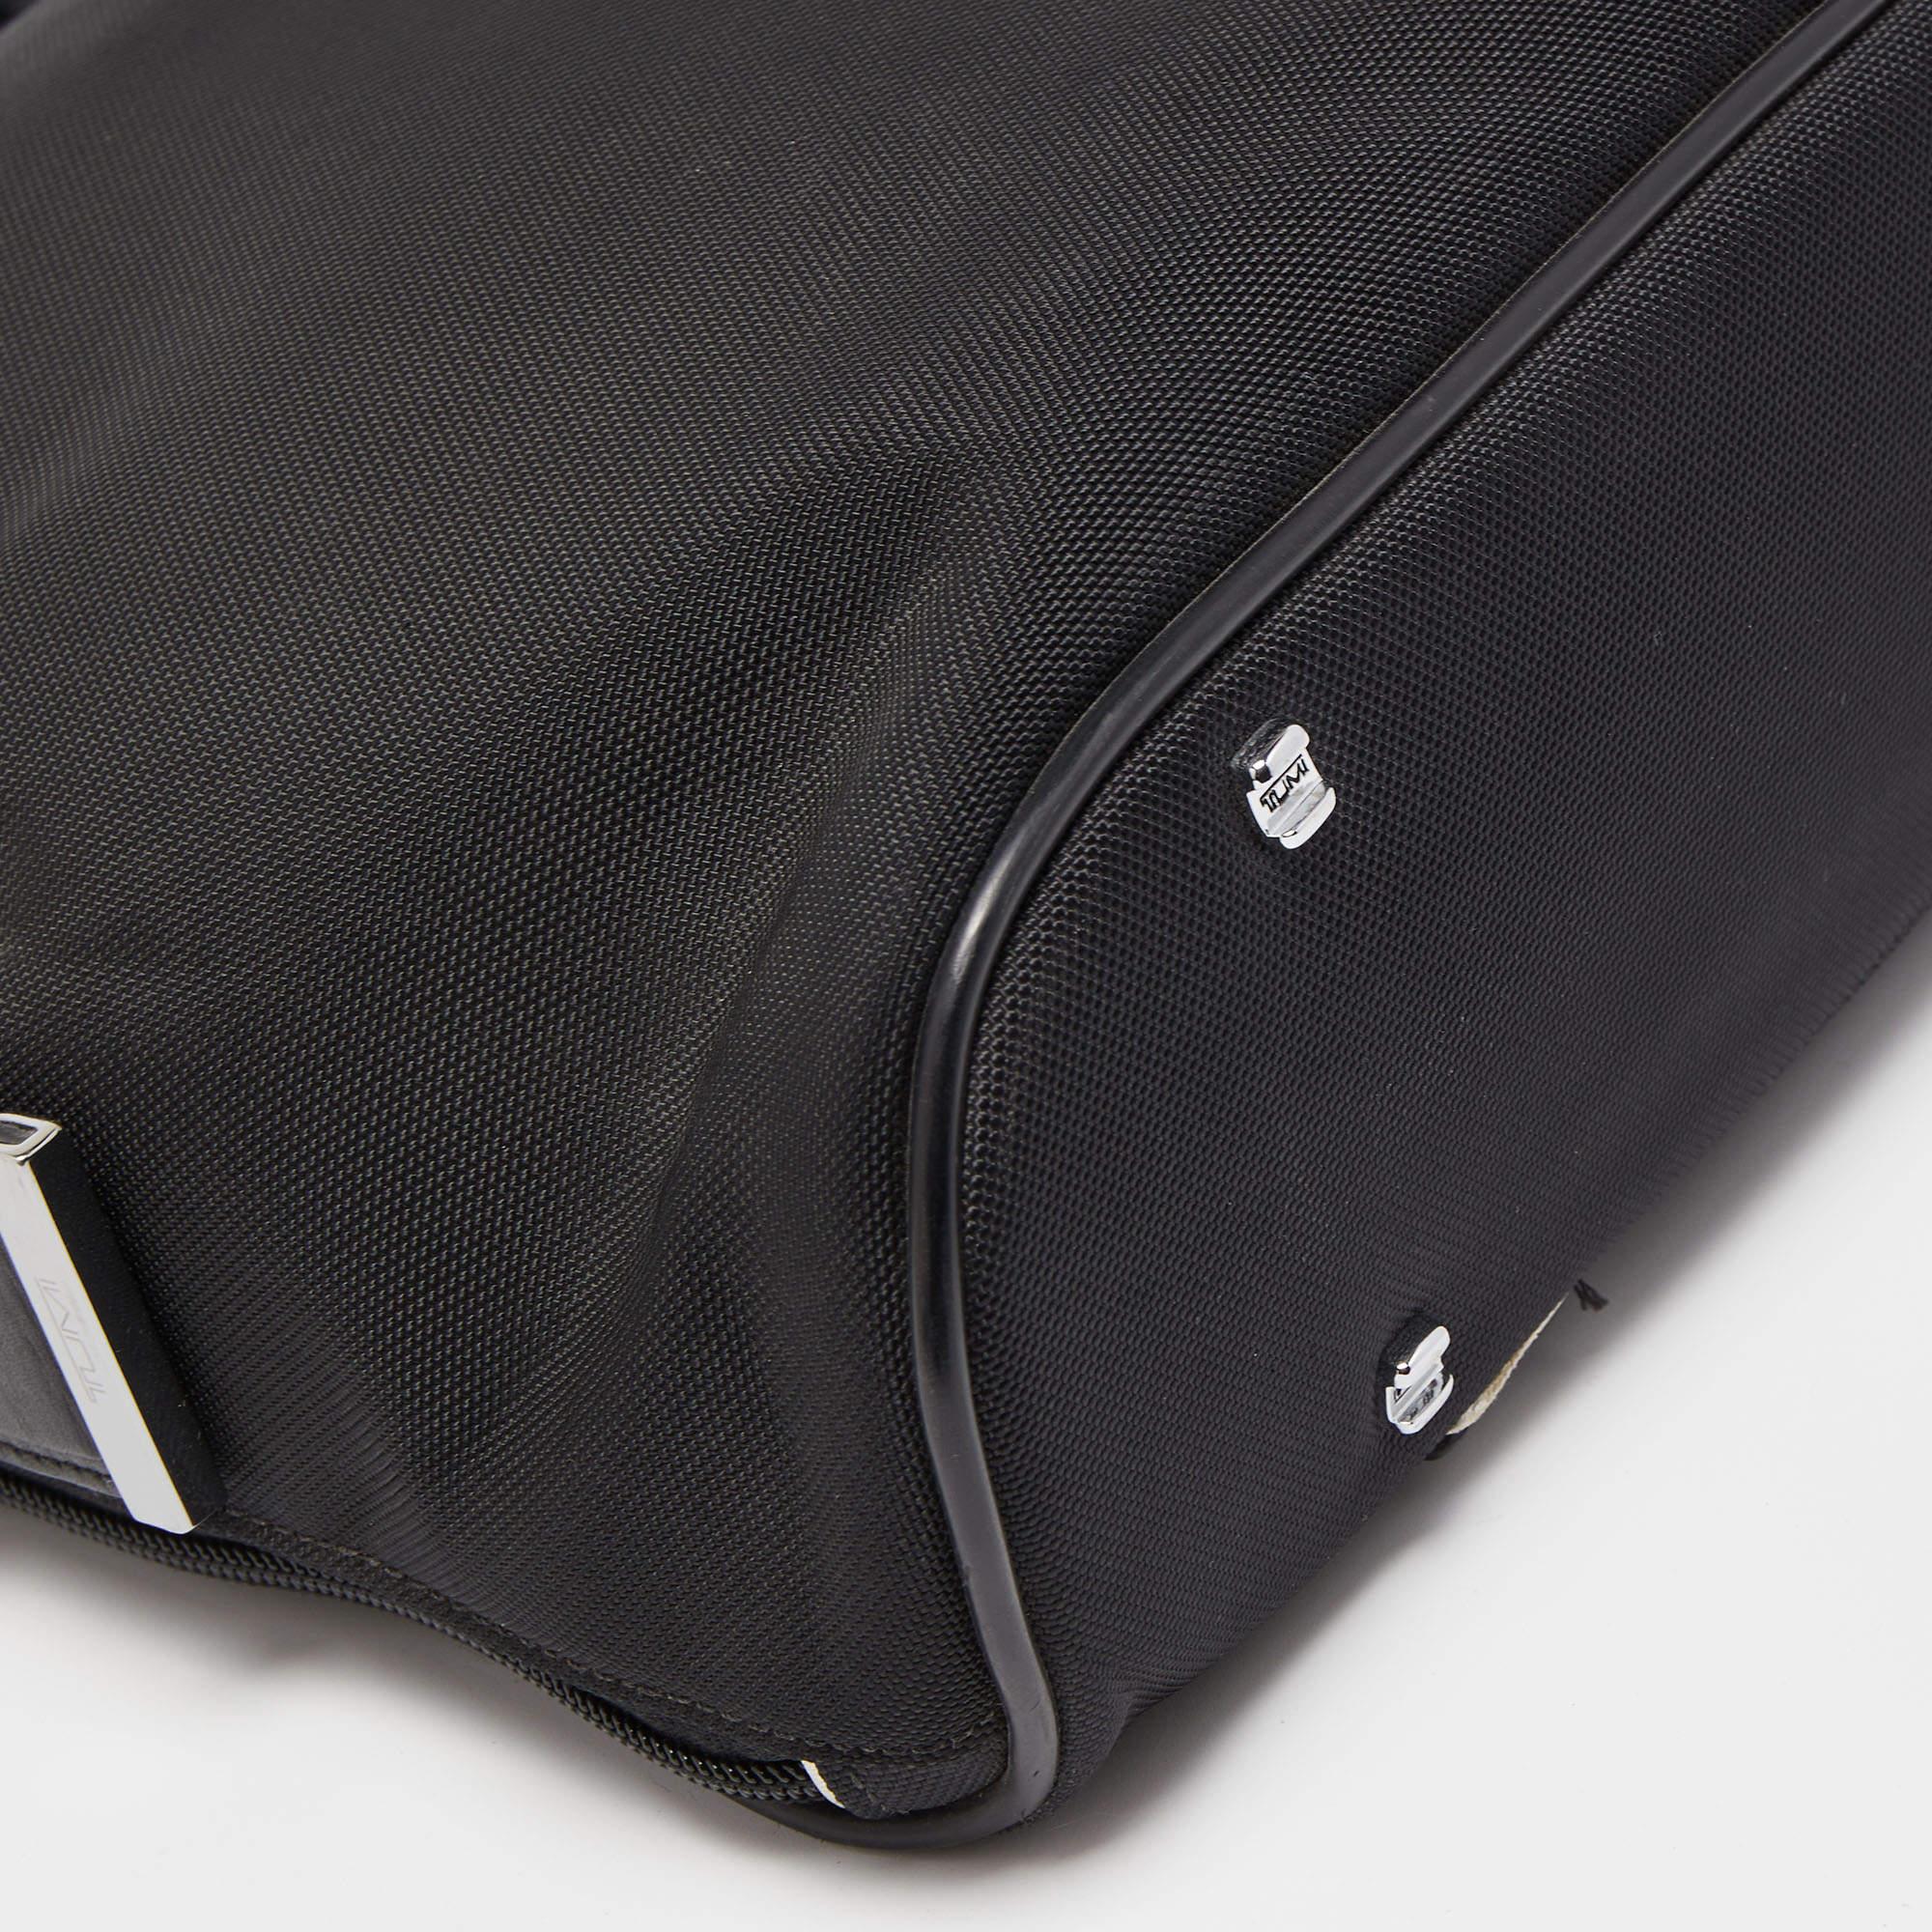 This TUMI laptop bag will carry all your essentials, whether headed to work or traveling around the world. Made from black nylon & leather, its durable design features front zipped pockets, top handles, and a shoulder strap.

